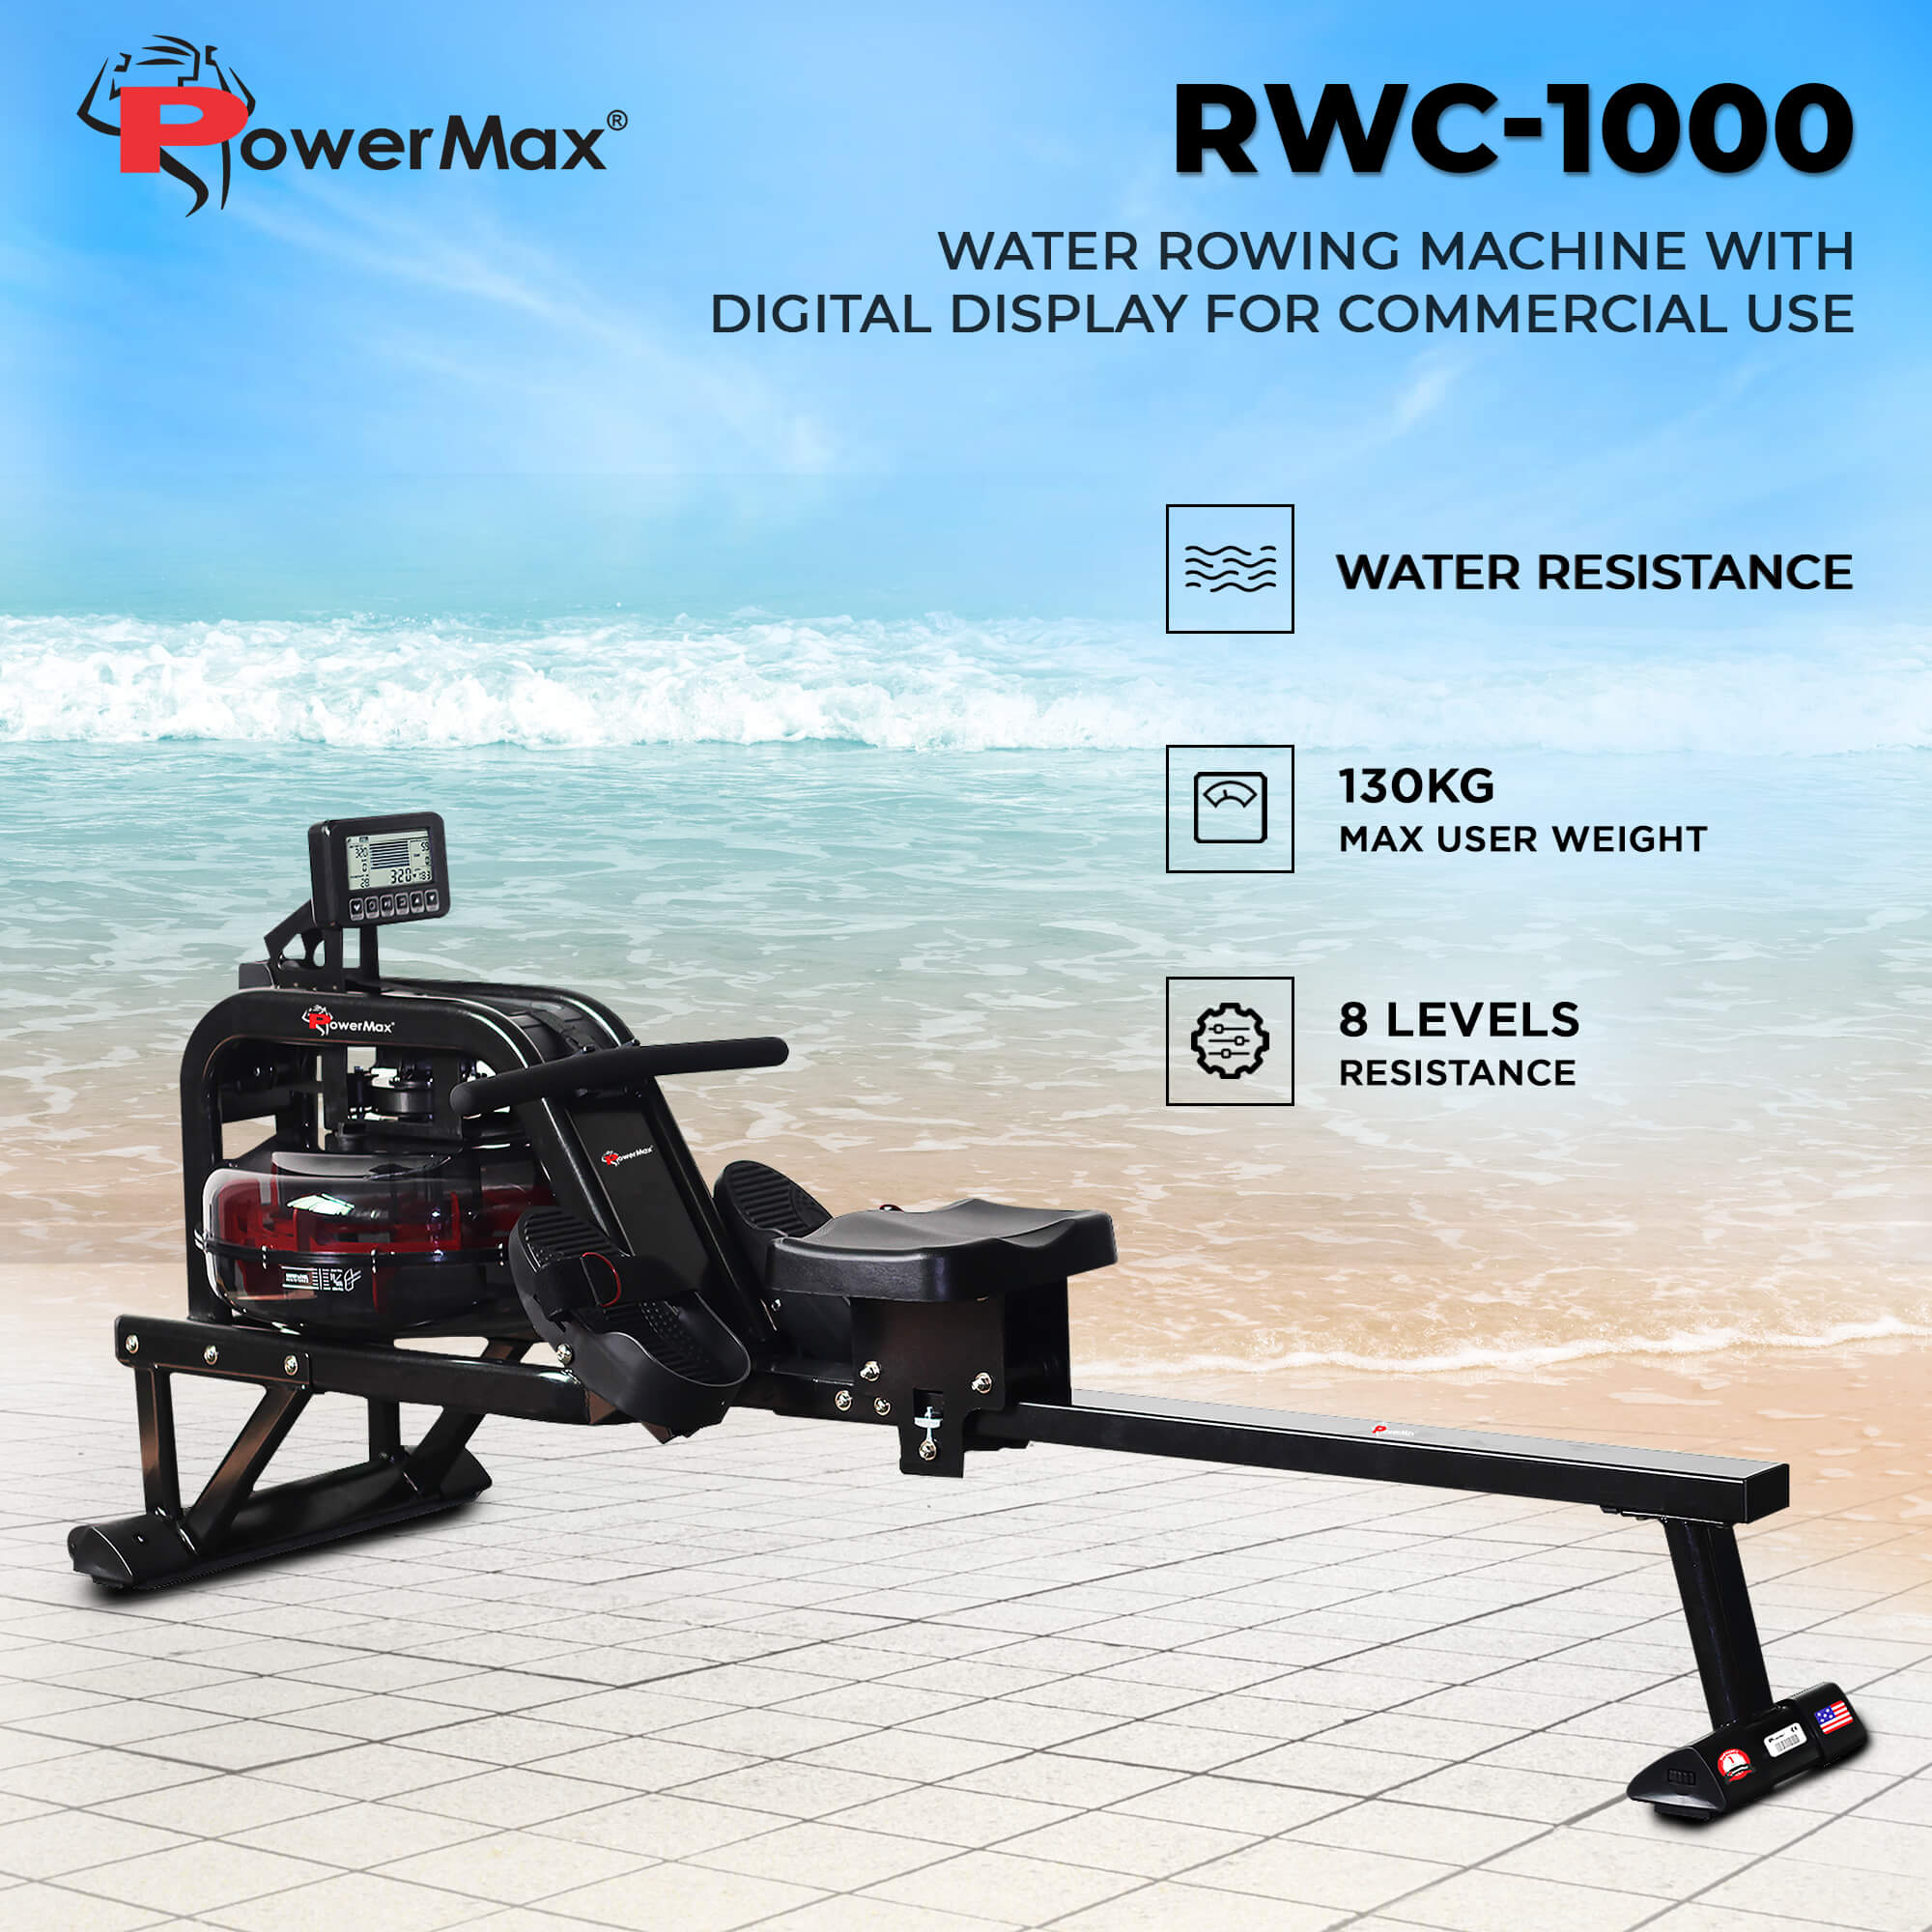 PowerMax Fitness RWC-1000 Water Rowing Machine with Digital Display for Commercial use